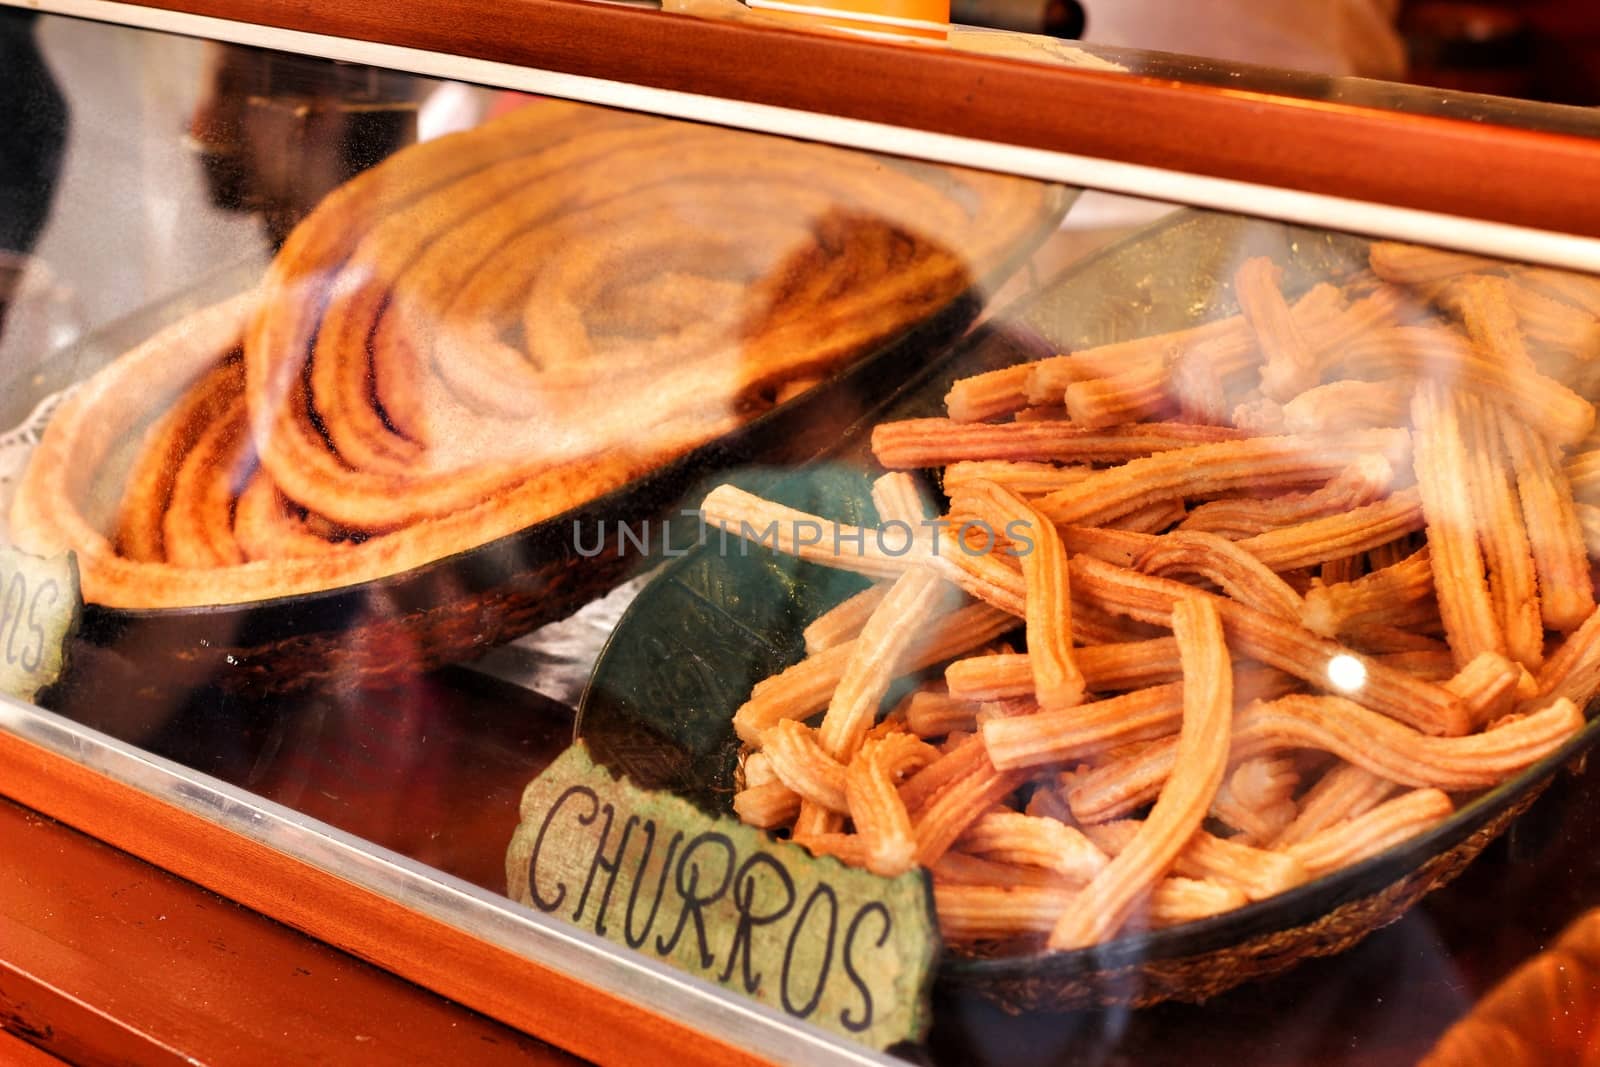 Tasty churros for sale in a street stall in Spain